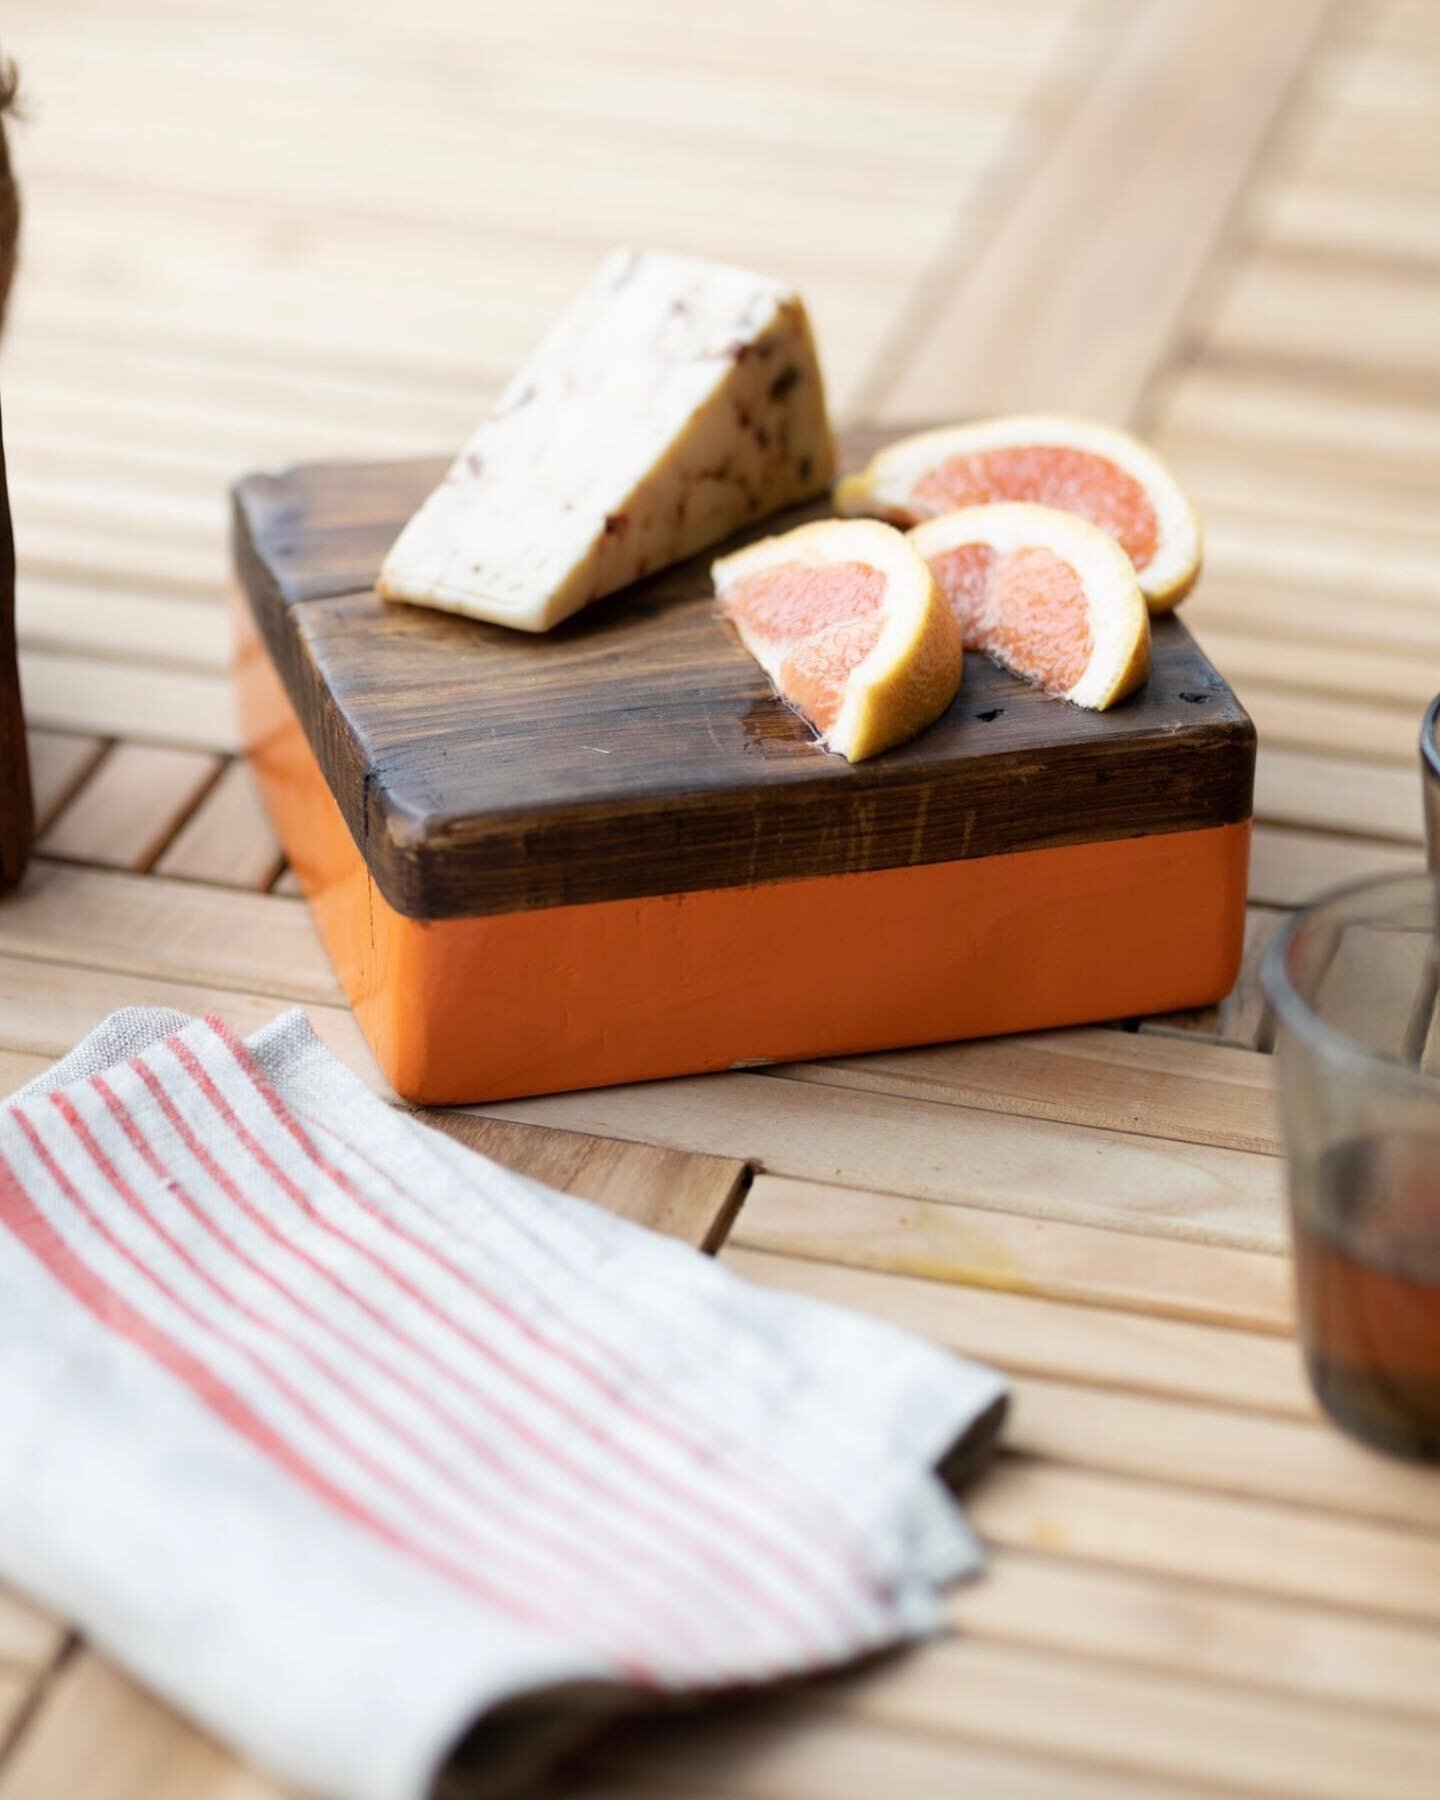 Sustainable snacking&hellip;our vintage wooden block is crafted from 19th century reclaimed wood and finished in natural beeswax and mineral oils. #summerentertaining 

#sustainability #dundeegardens #summertime #hostessgift #hostessgifts #vintage #s